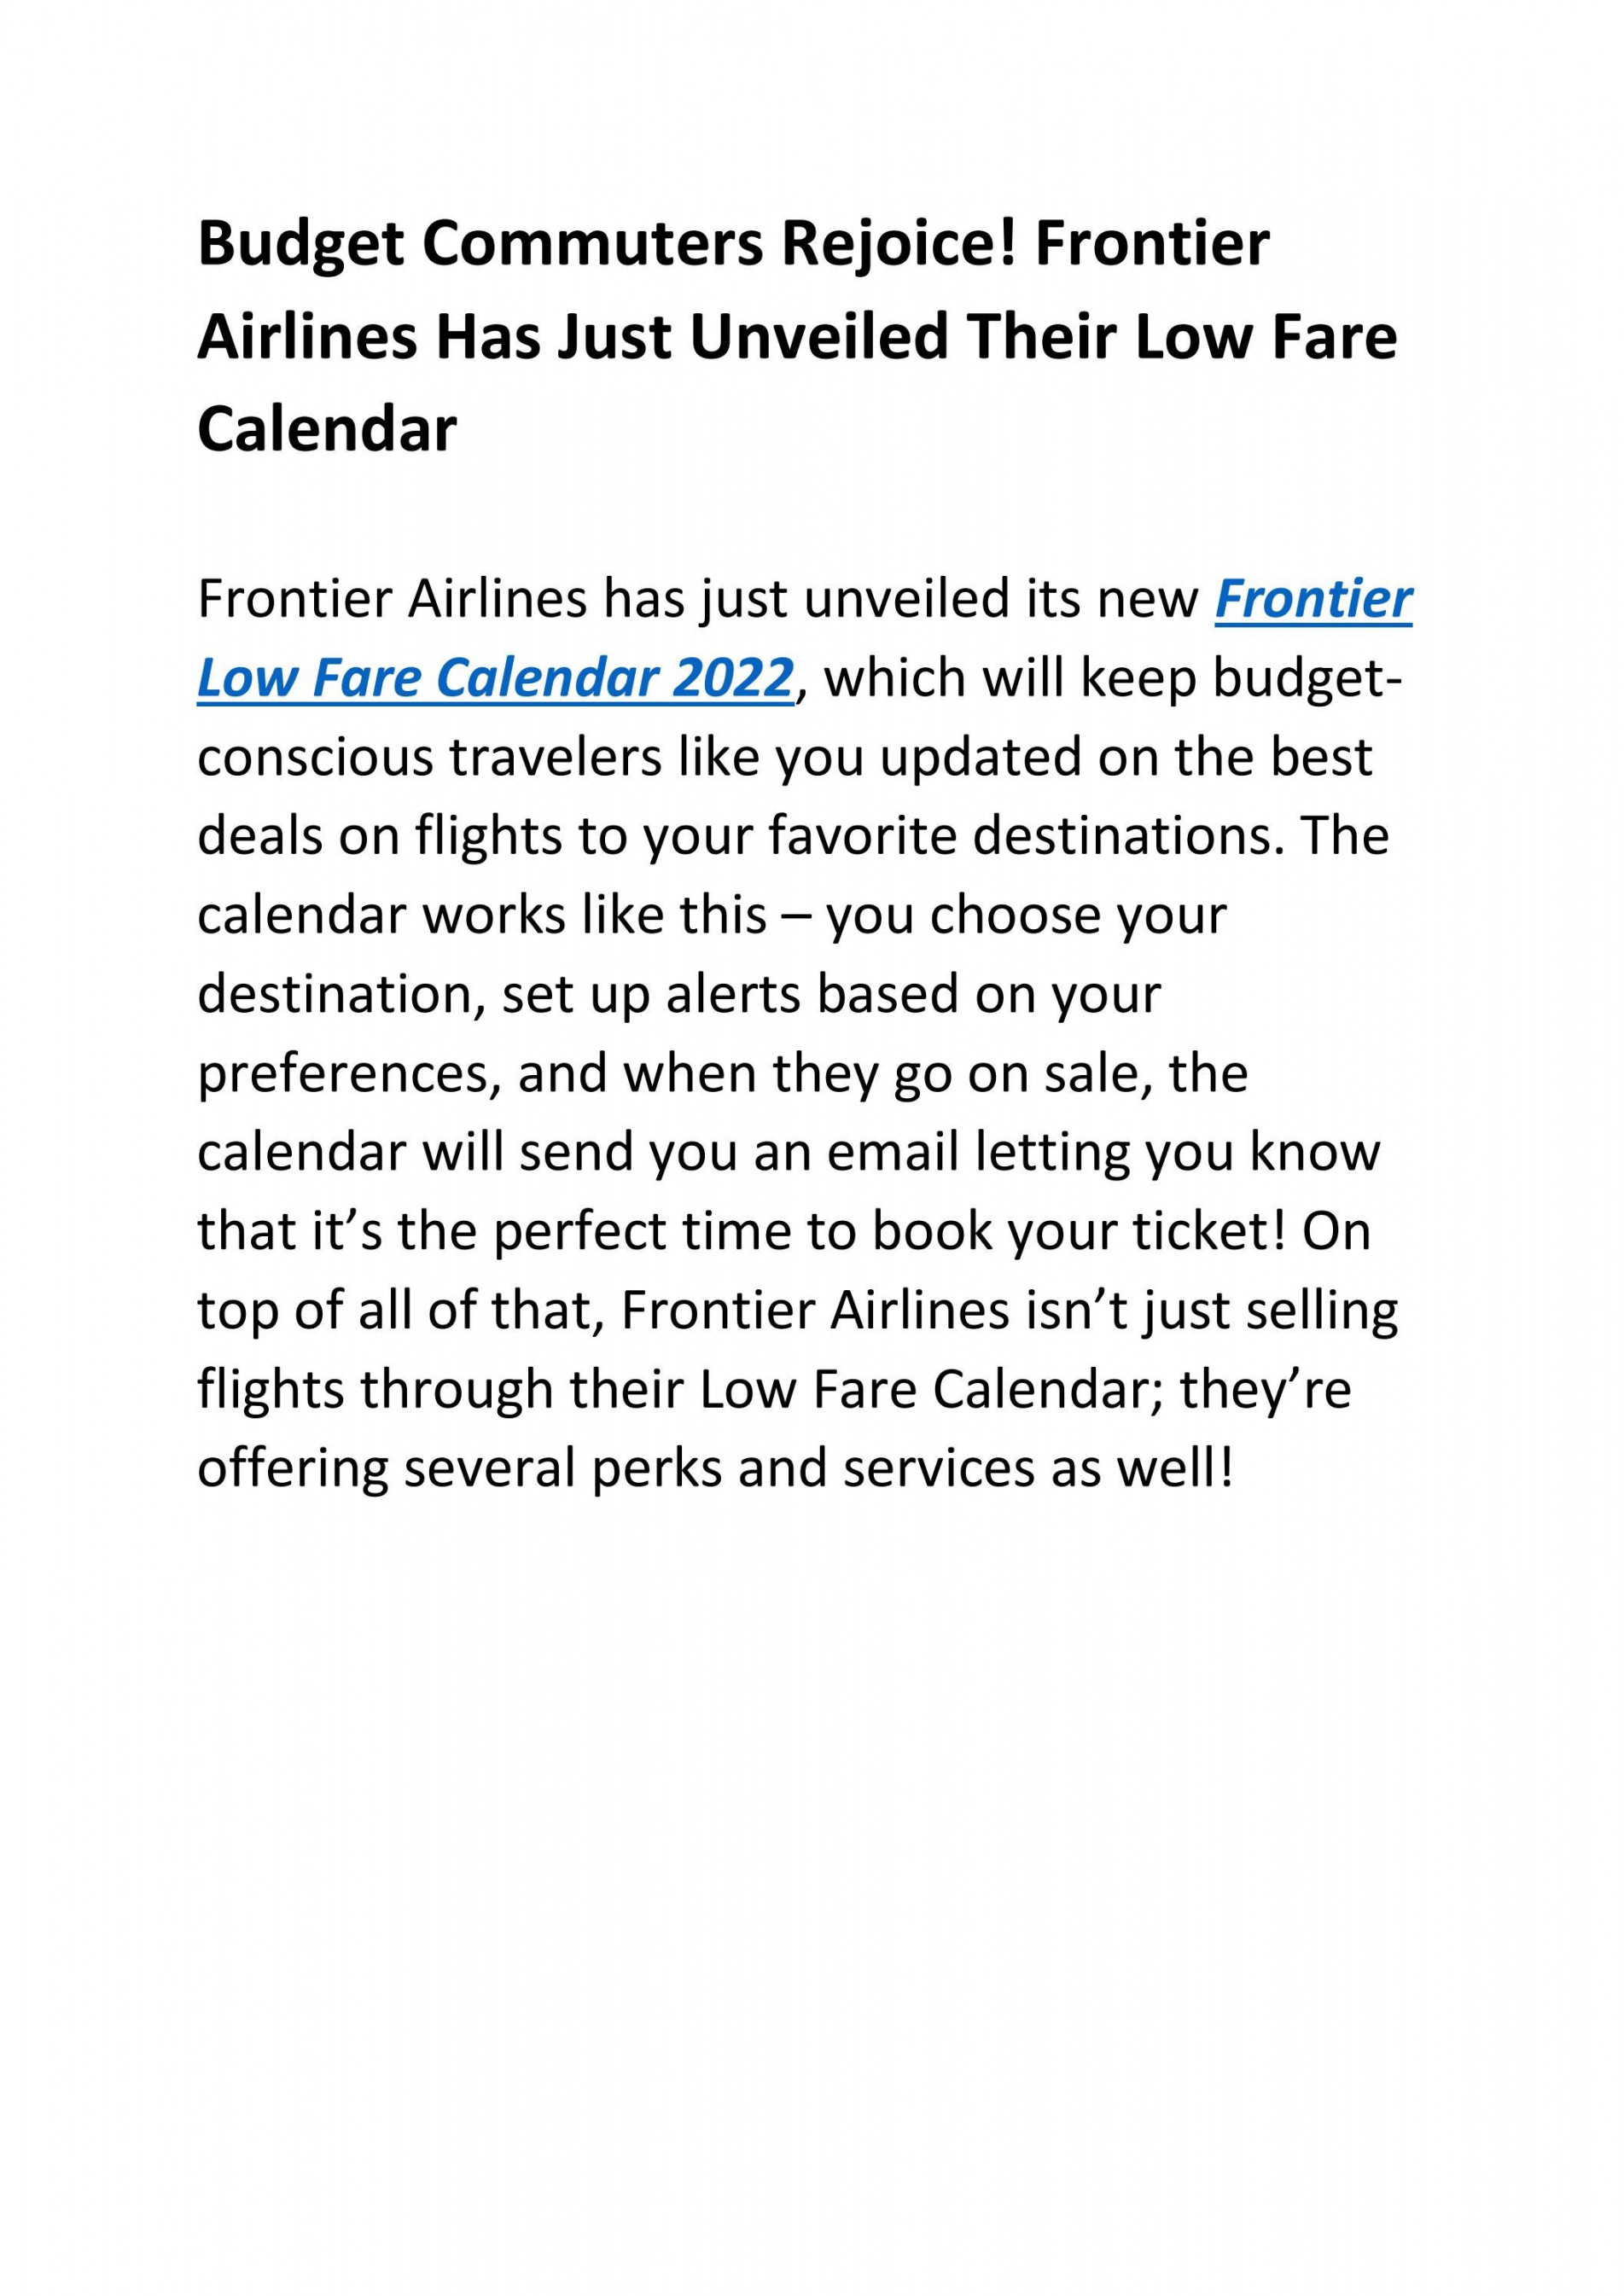 Frontier Airlines Has Just Unveiled Their Low Fare Calendar by